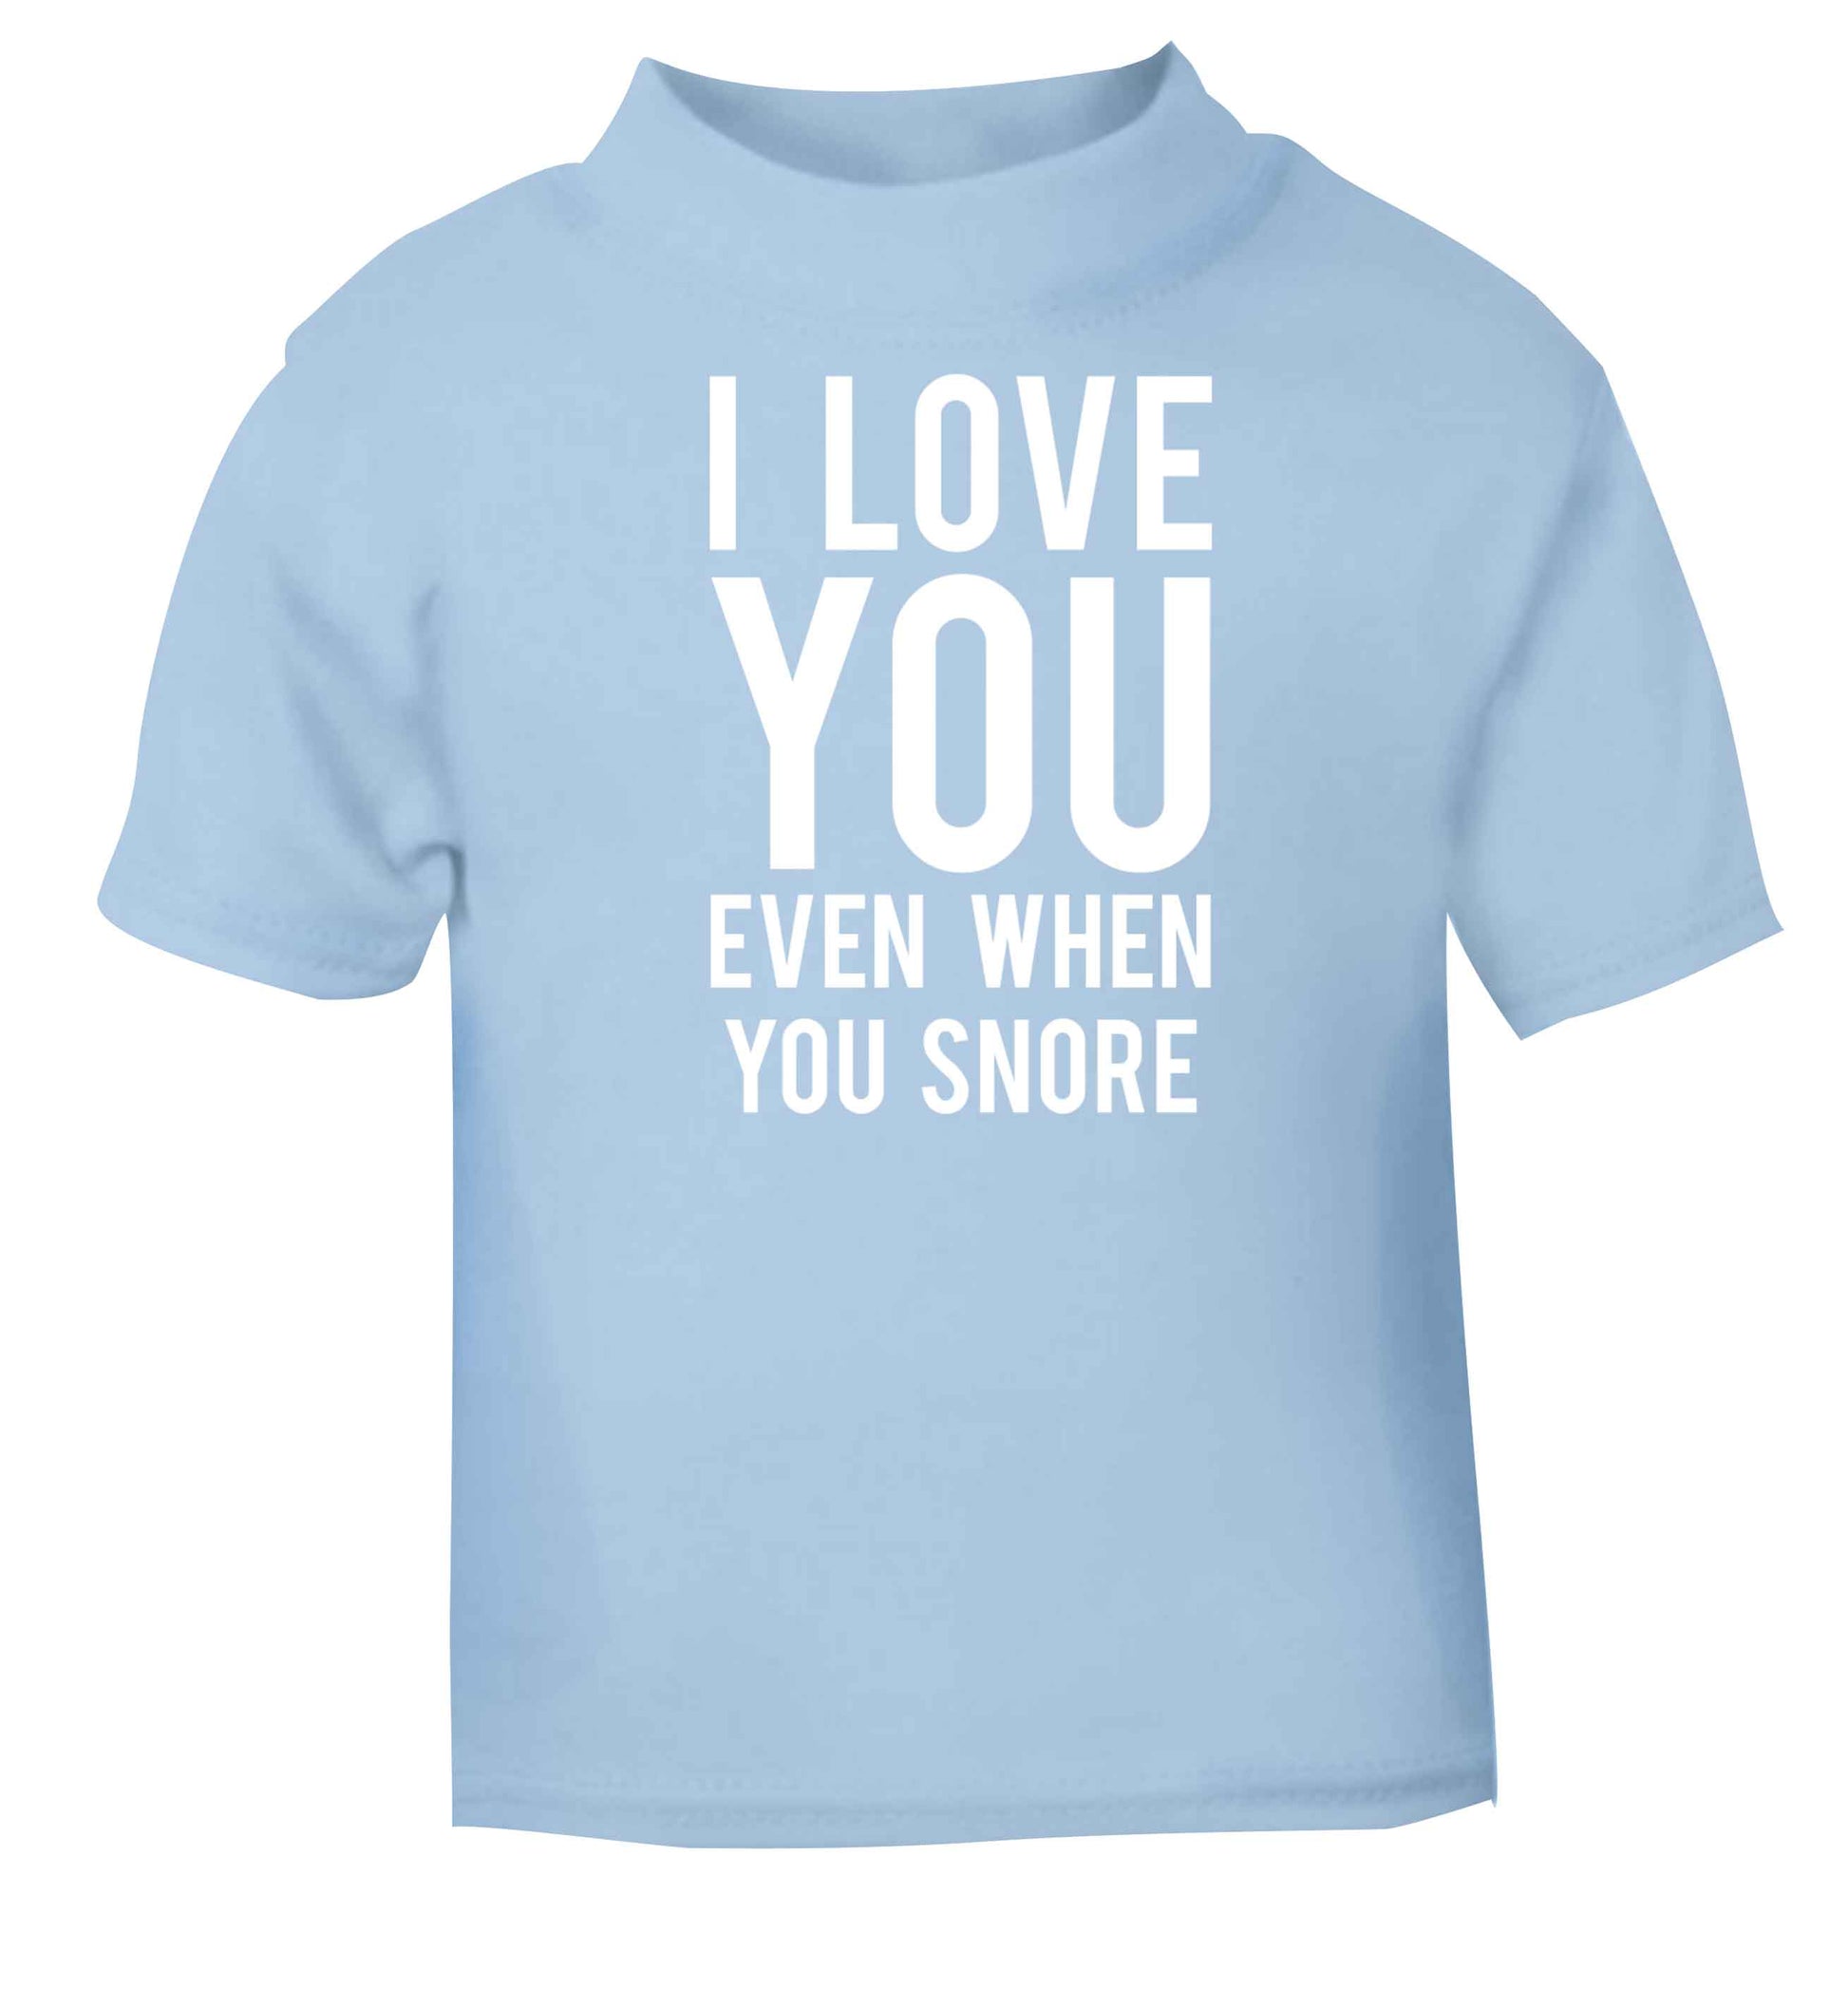 I love you even when you snore light blue baby toddler Tshirt 2 Years